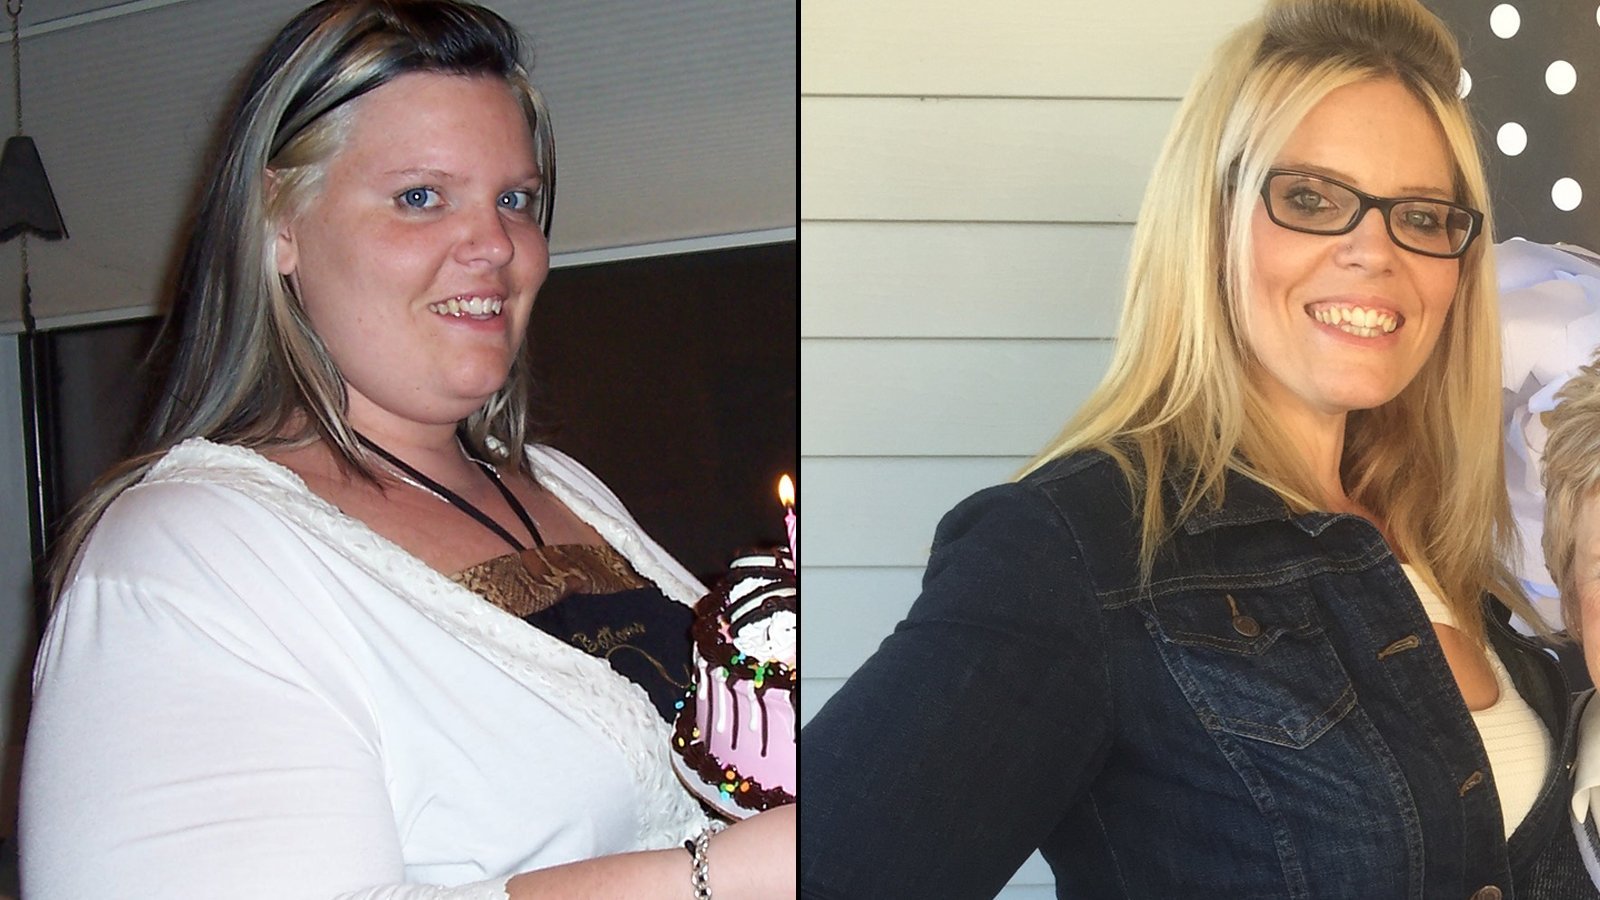 Joanna Pearson was 410 pounds at her heaviest. She lost weight through of diet and exercise.